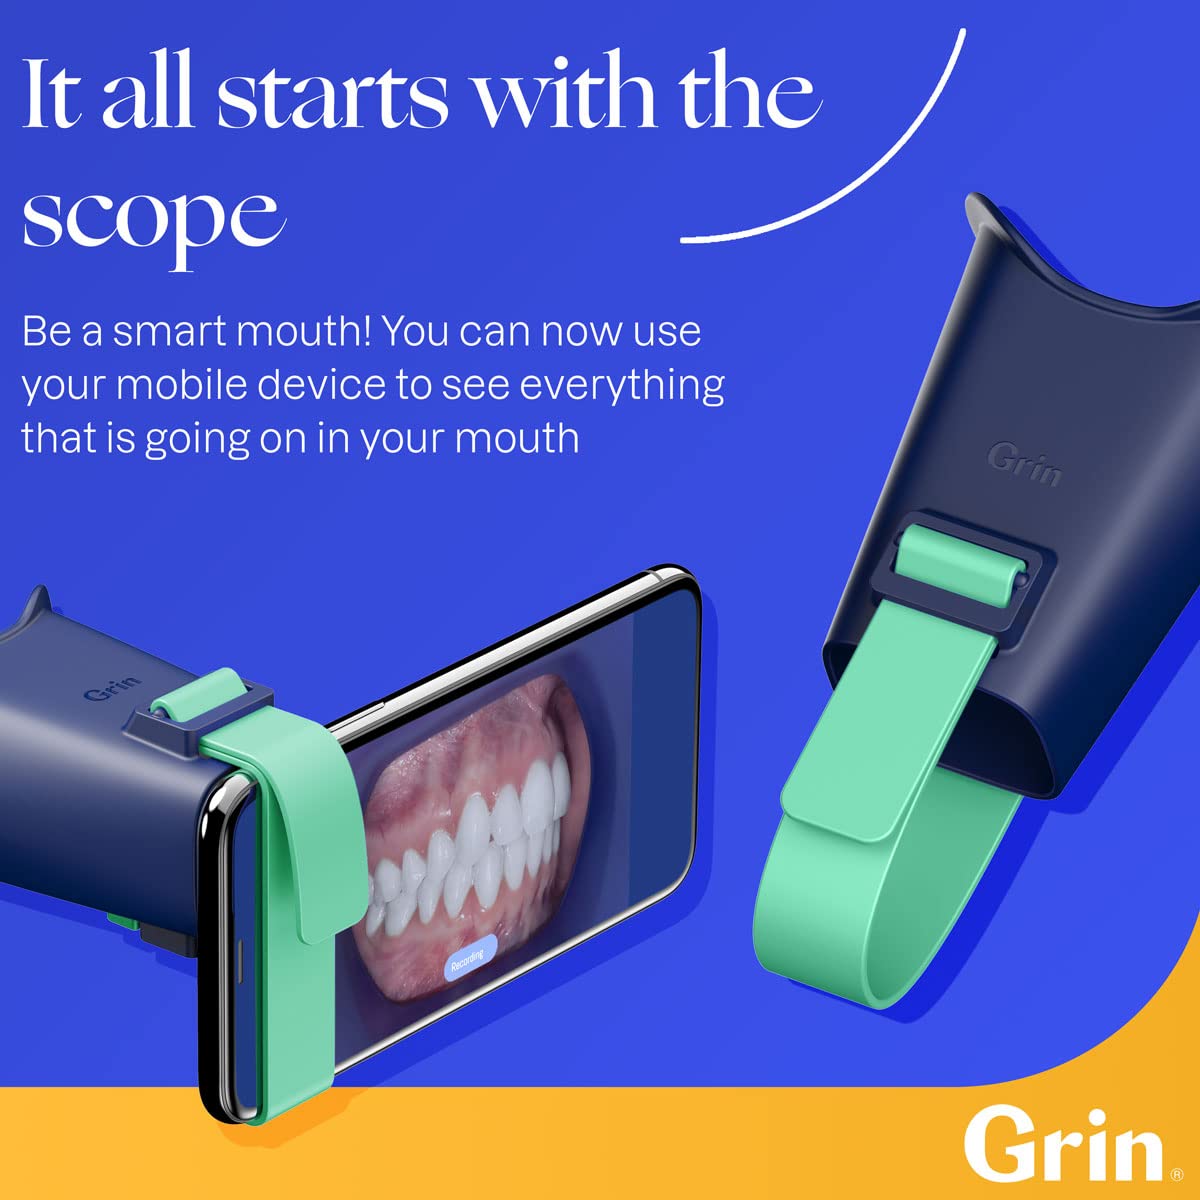 Grin Dental Scanner with Complimentary Consultation - (Watch The Video) Improved Dental Health Via Virtual Dental App Connected Directly To a Dentist from Home - FDA Registered